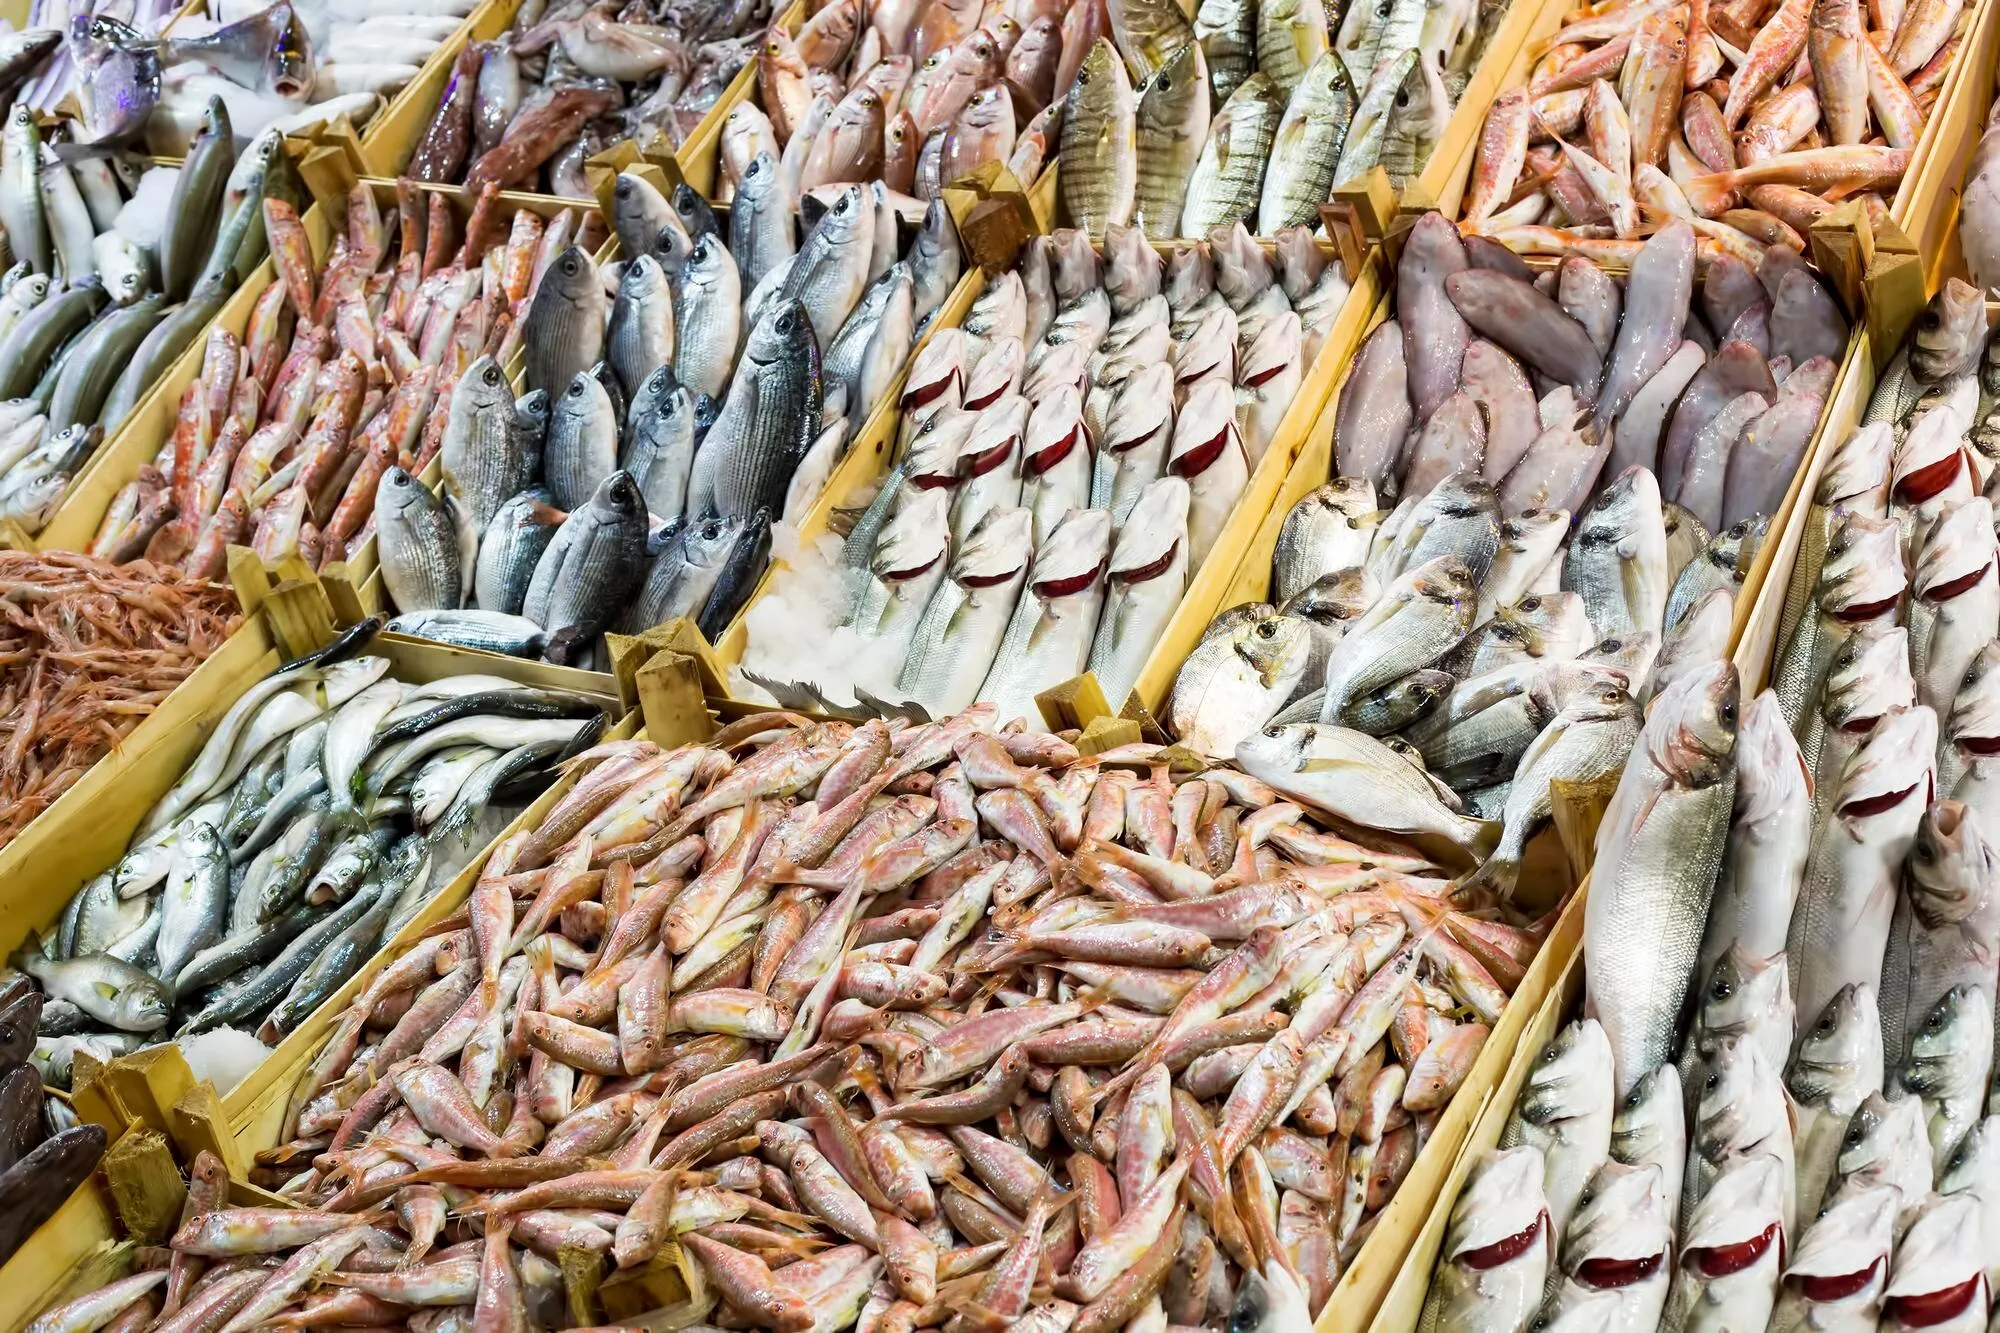 Kadikoy Fish Market in Turkey, central_asia | Seafood - Country Helper